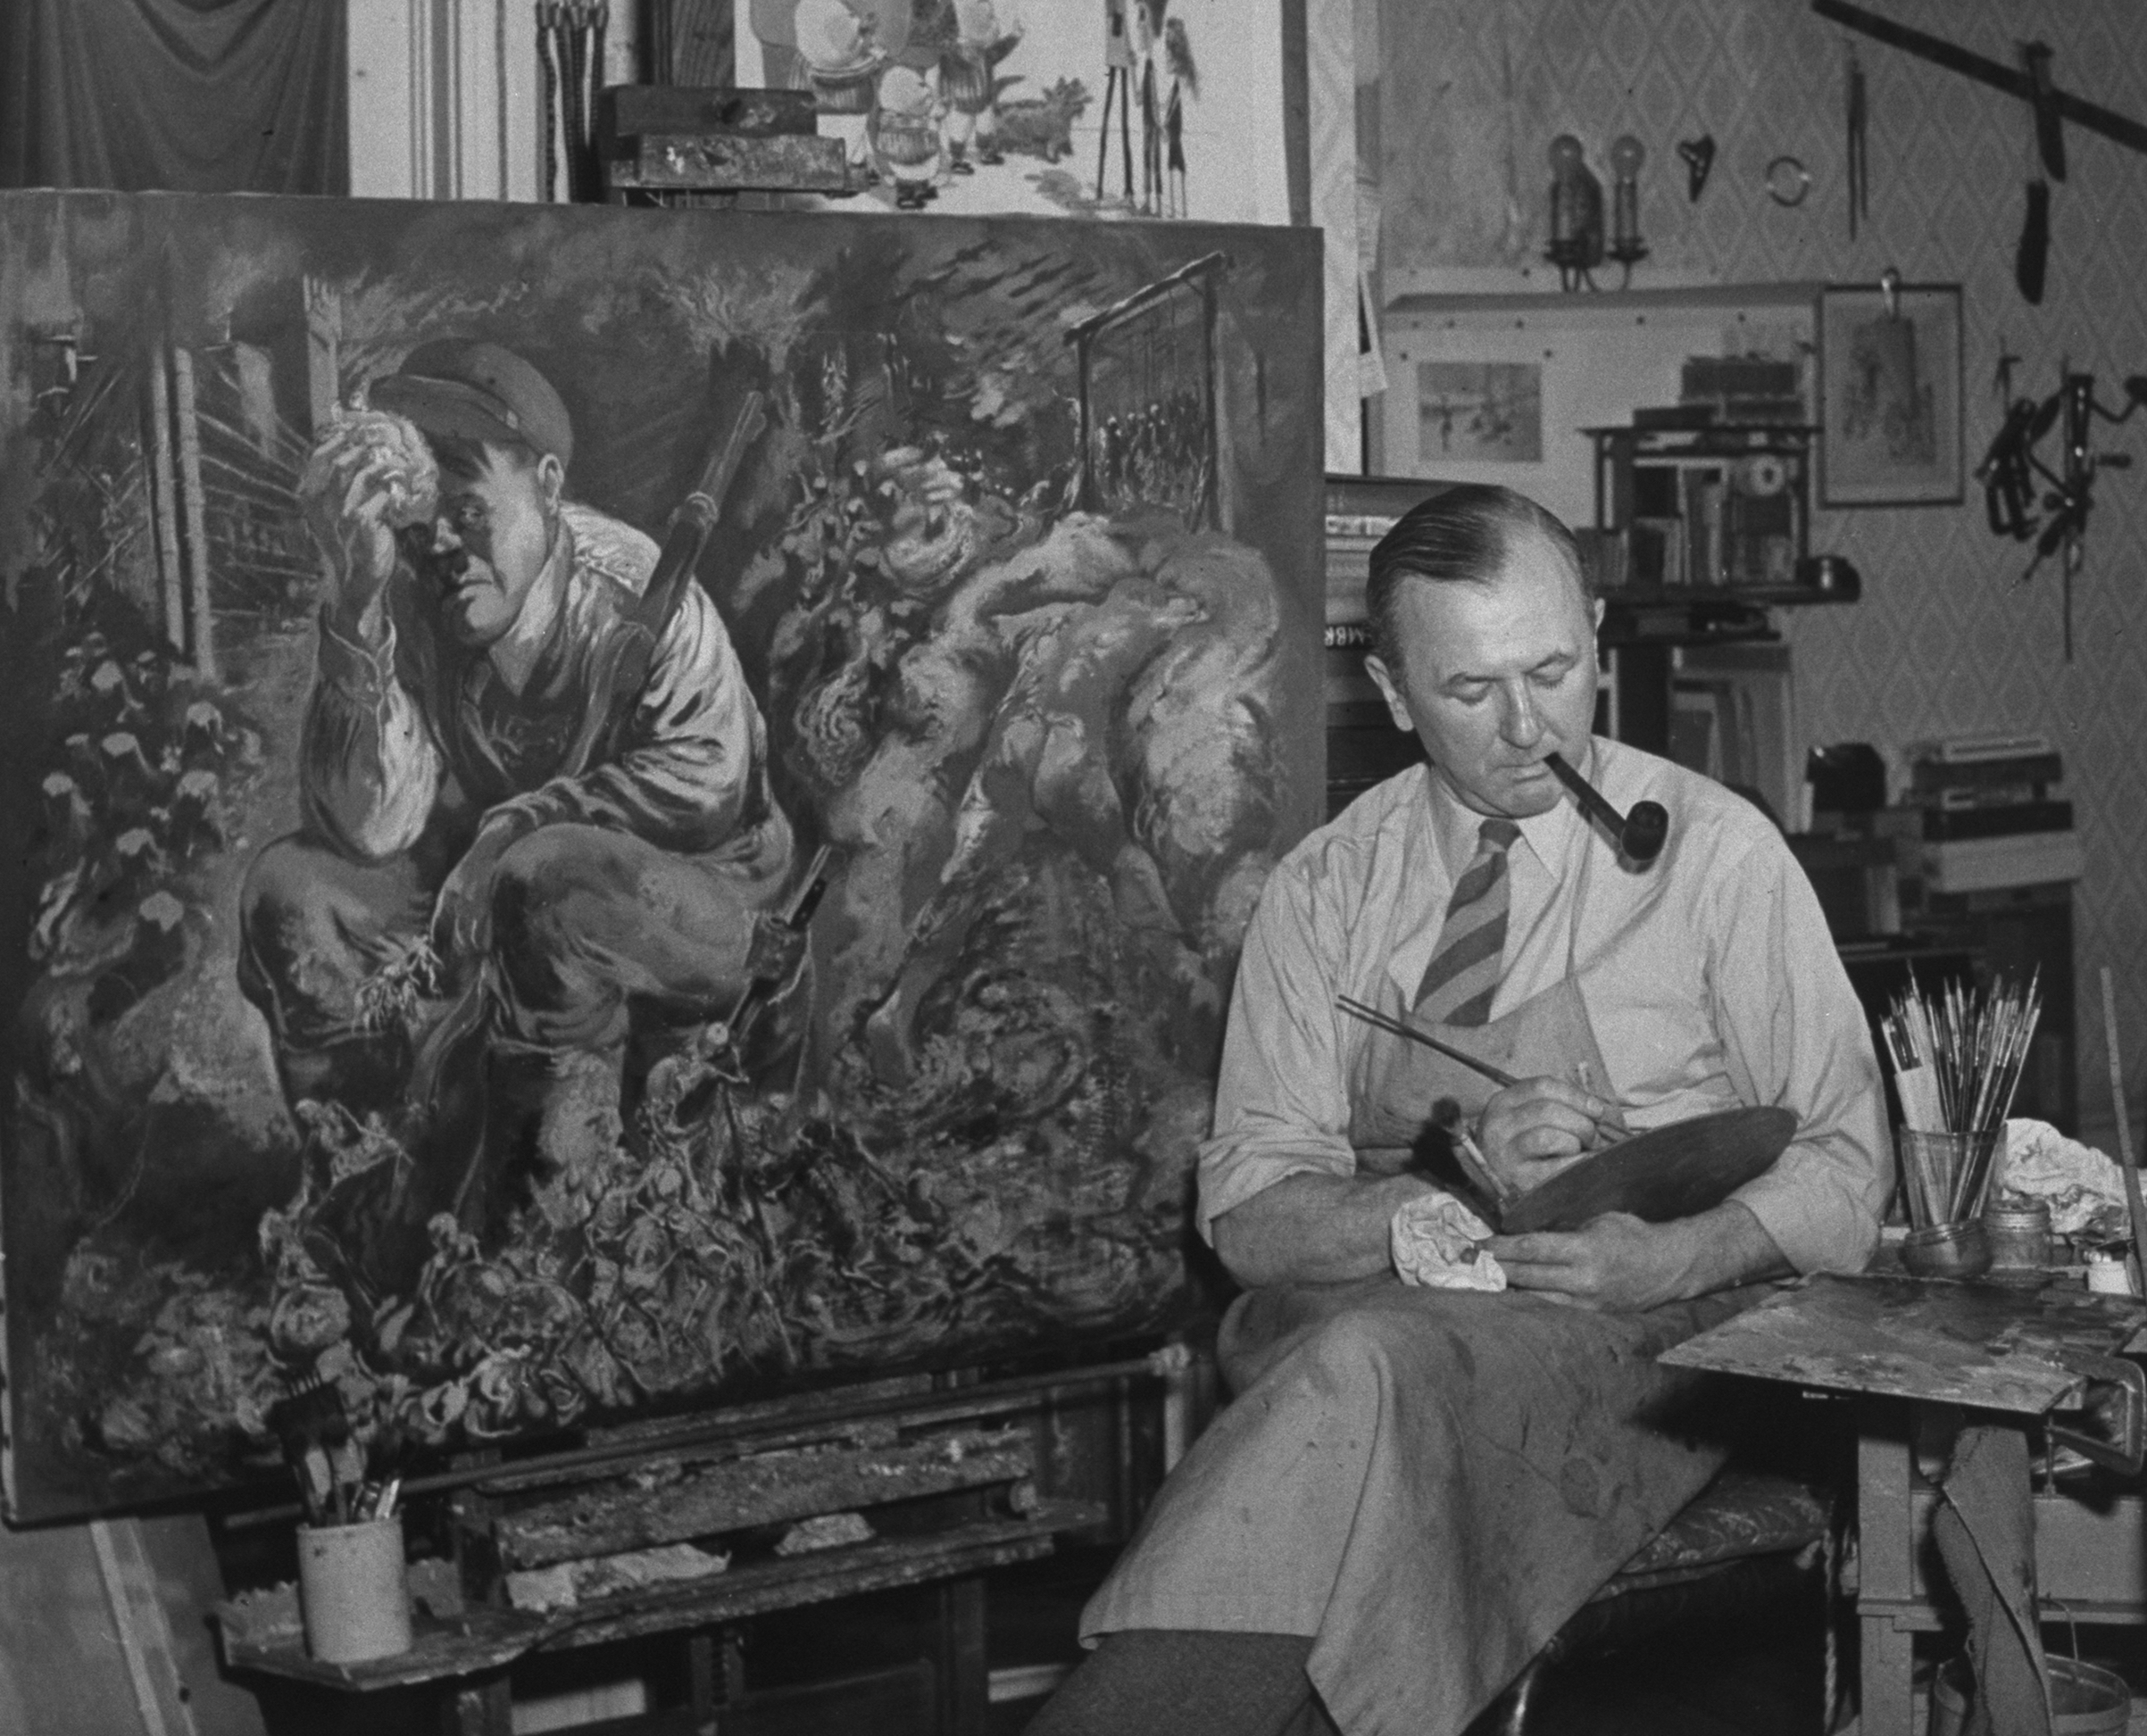 German-born painter George Grosz working on a satirical painting that depicts Adolf Hitler resting with skeletons at his feet, in studio at home (Time Life Pictures/Getty Images)